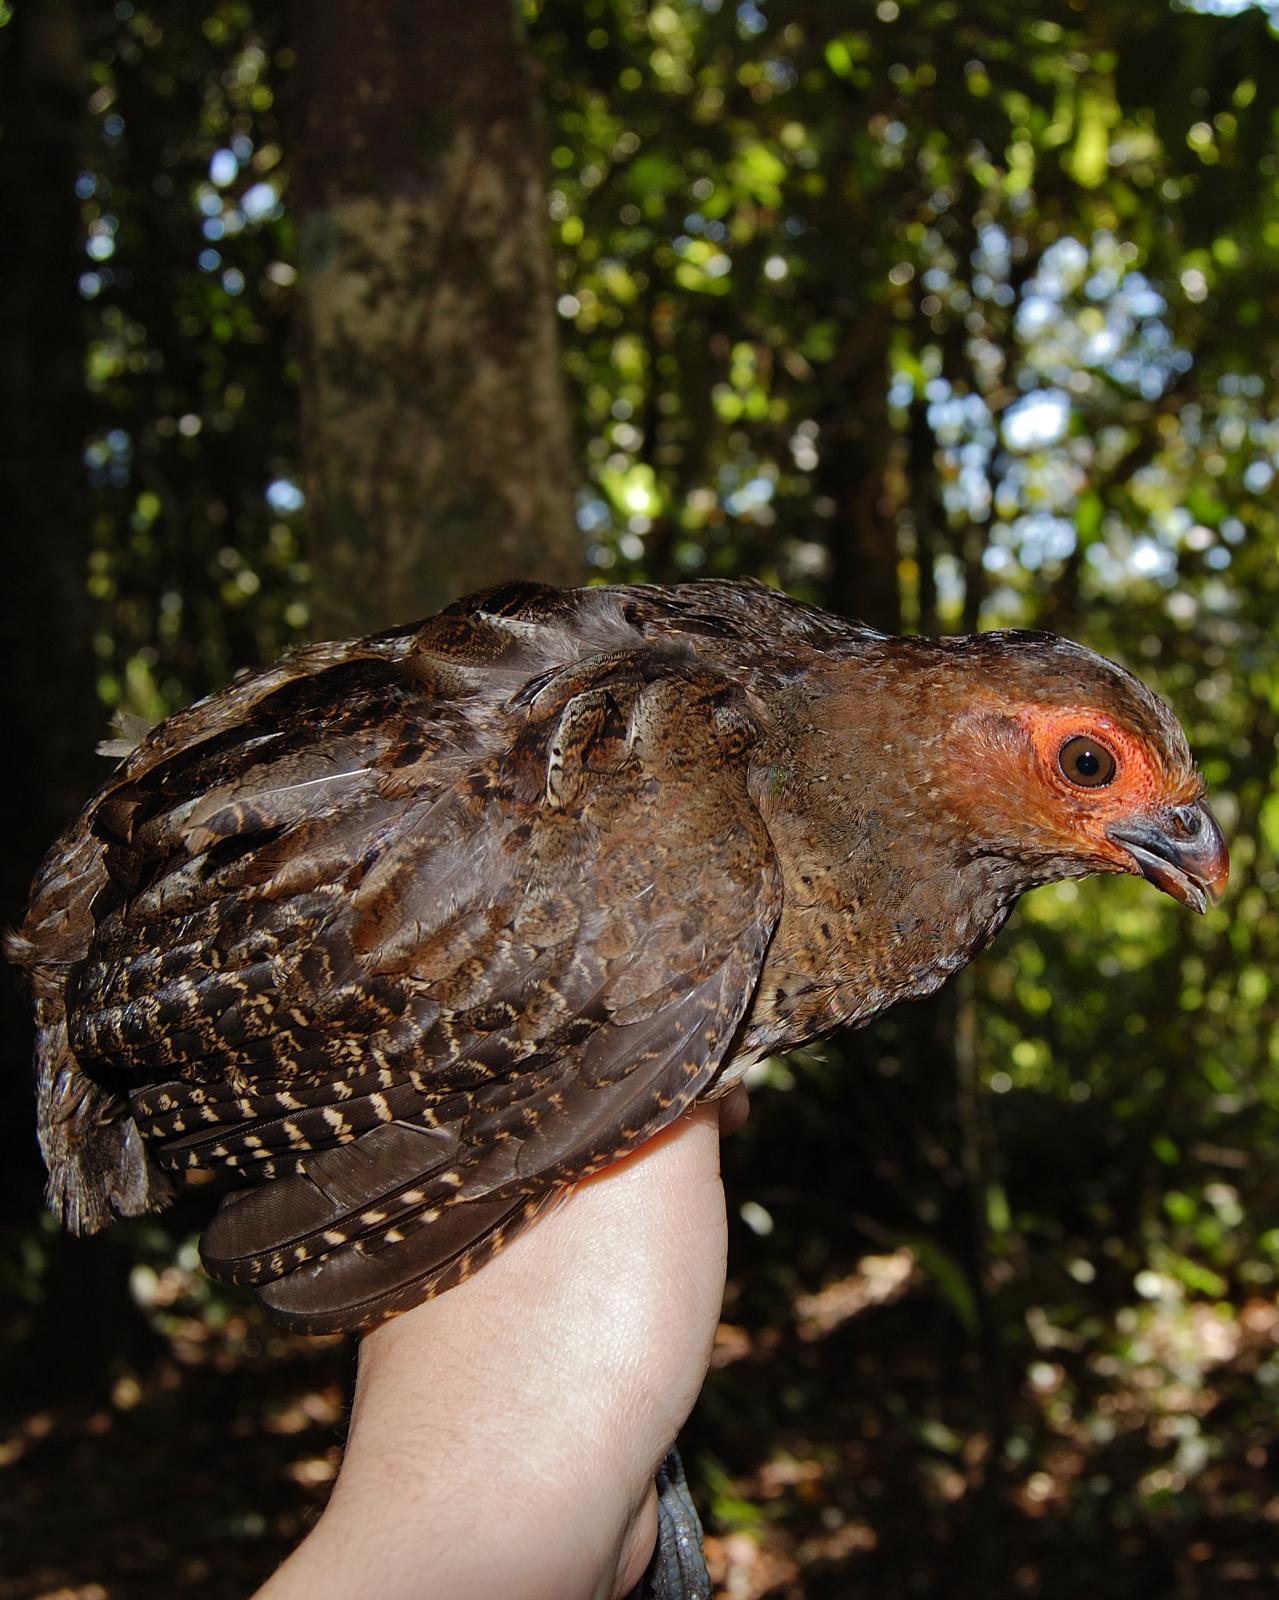 Marbled Wood-Quail Photo by Leslie E. Tucci